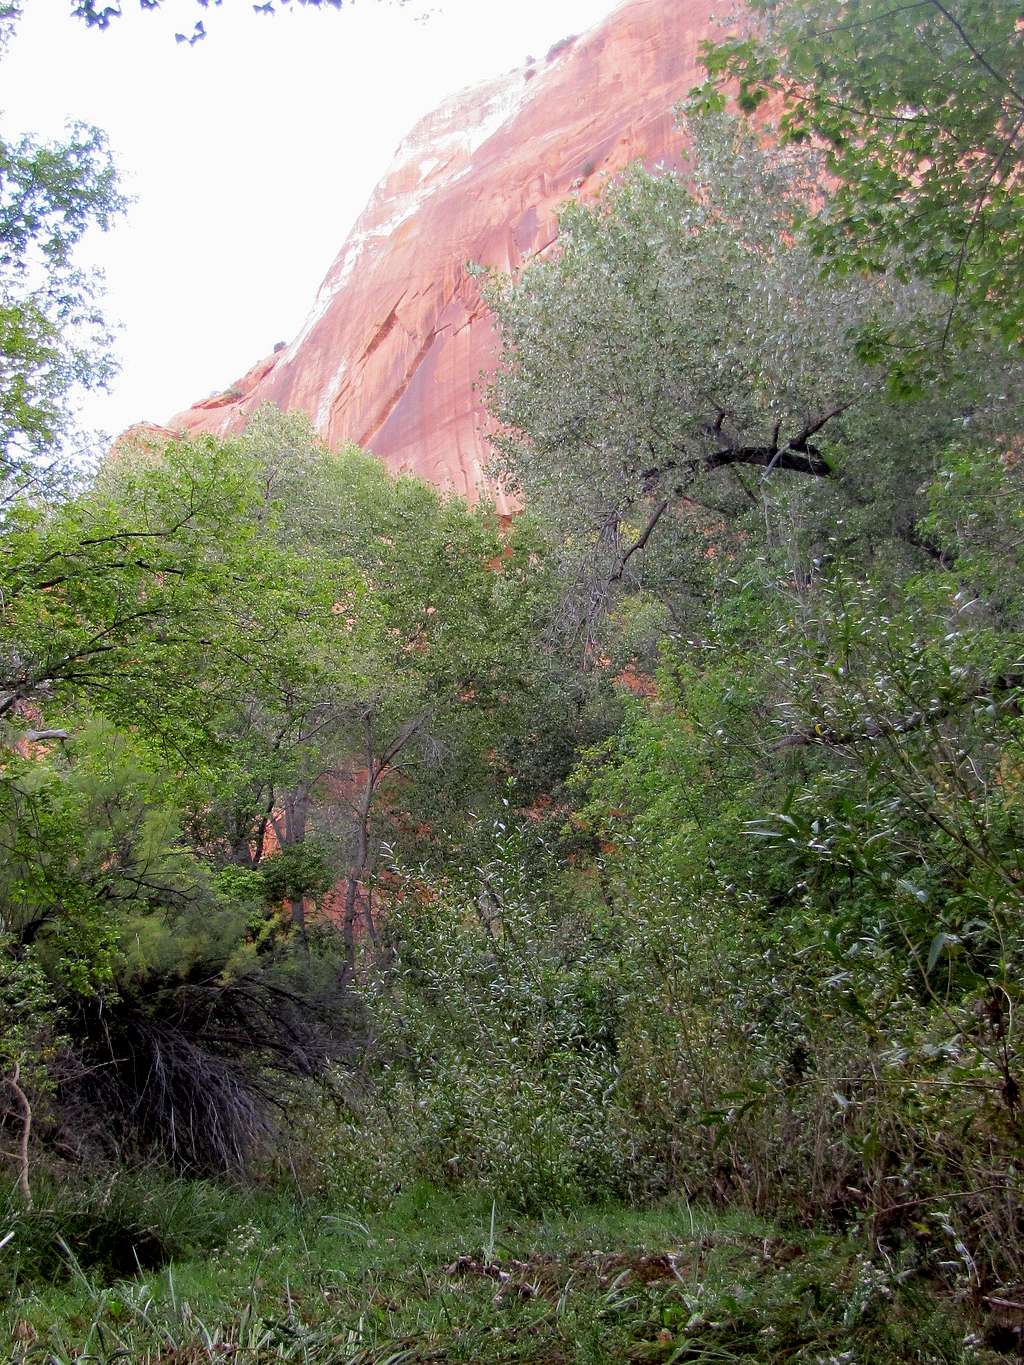 The narrow part of Phipps Canyon